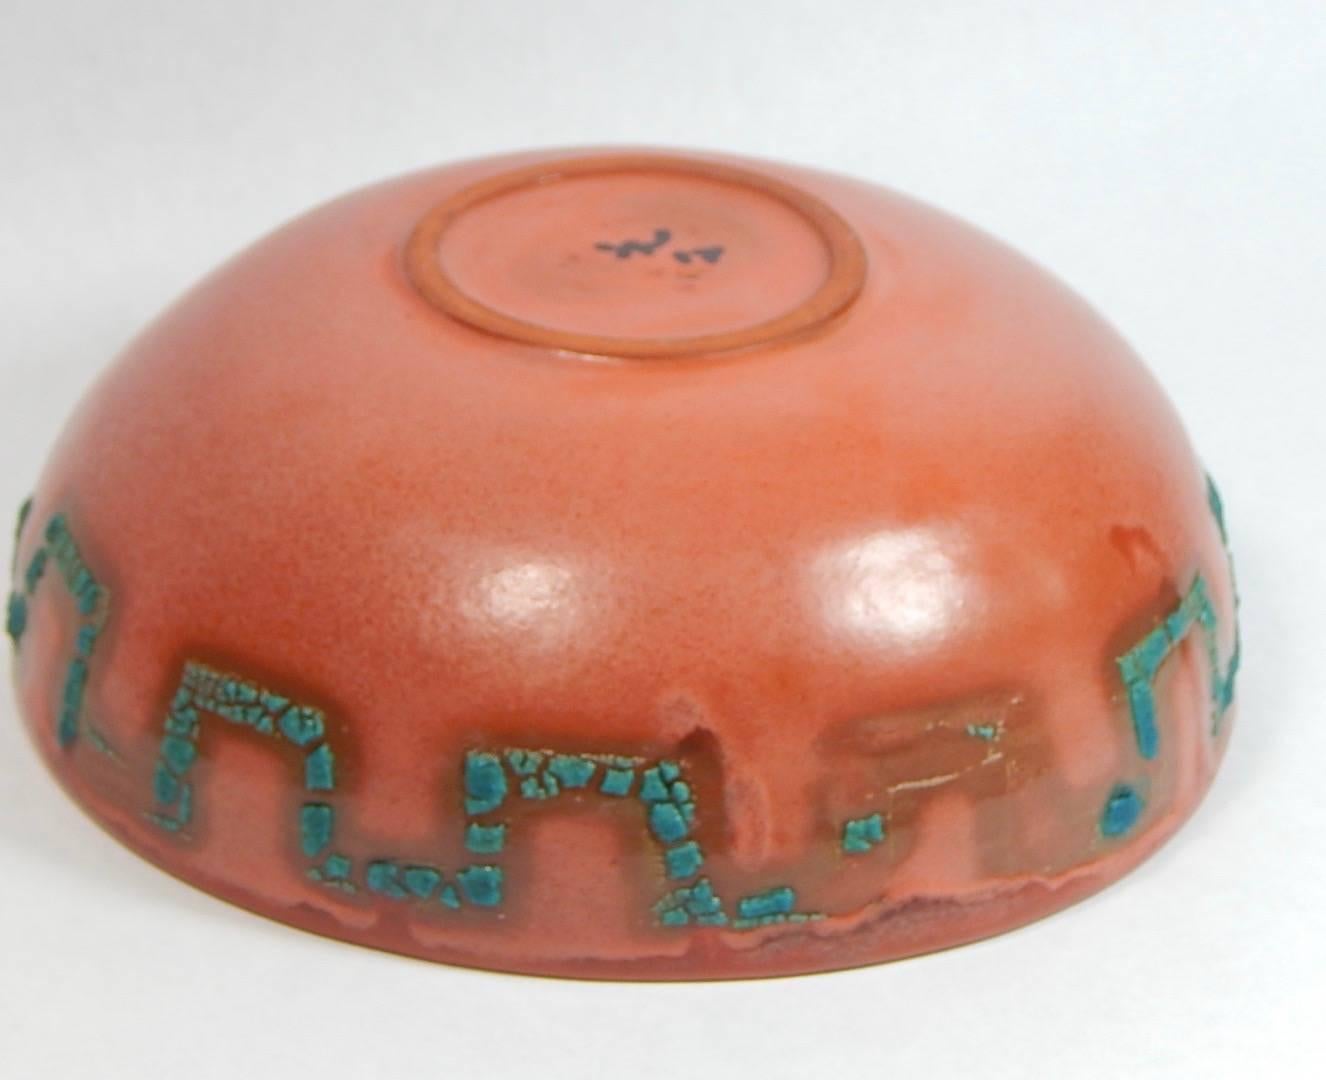 Relicware Earthenware Bowl #64 By Andrew Wilder In Excellent Condition For Sale In Richmond, VA